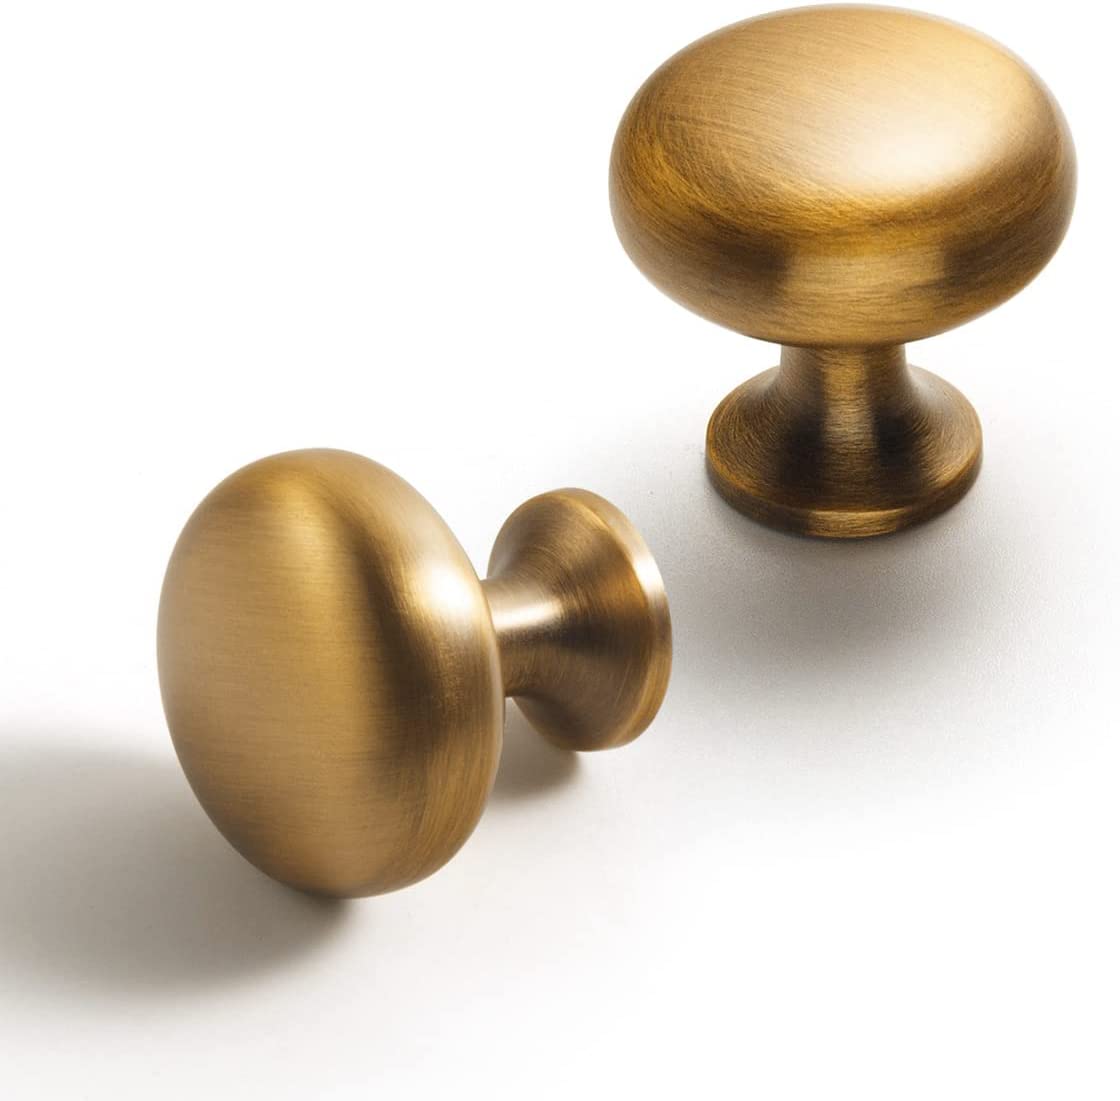 solid brass kitchen cabinet door knobs simple pull knobs for cabinets doorknob shaped pulls silky finish easy to coordinate hardware for kitchens affordable cabinet knobs for sale